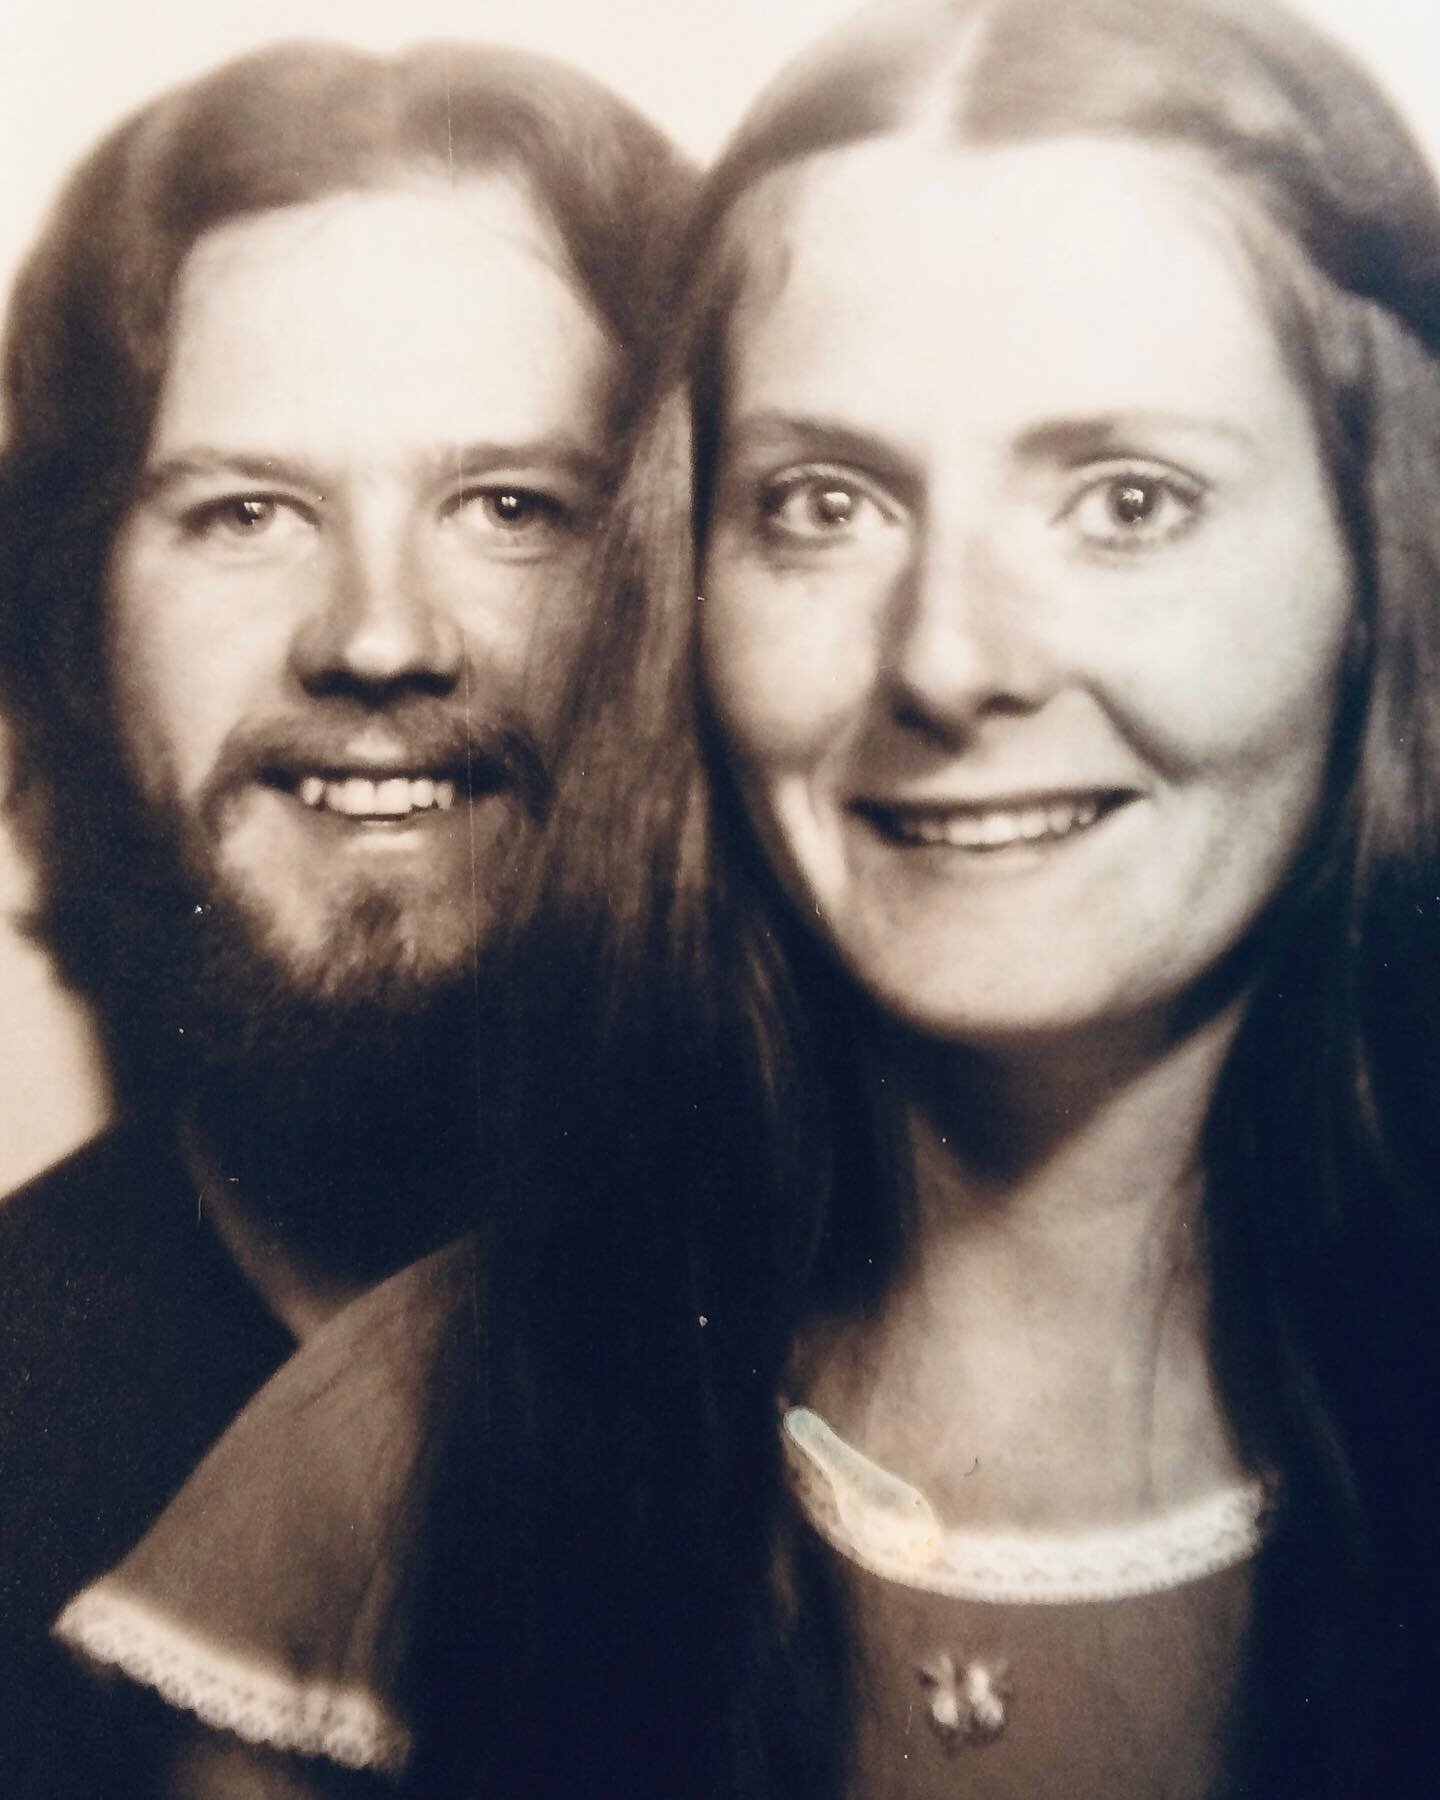 My beautiful parents in the 70s. (How cool are they??) Some of my earliest memories are of both of them working to make a home, working on the old farmhouse they bought. My mother painting everything in sight - and wallpaper! - plaids and florals in 